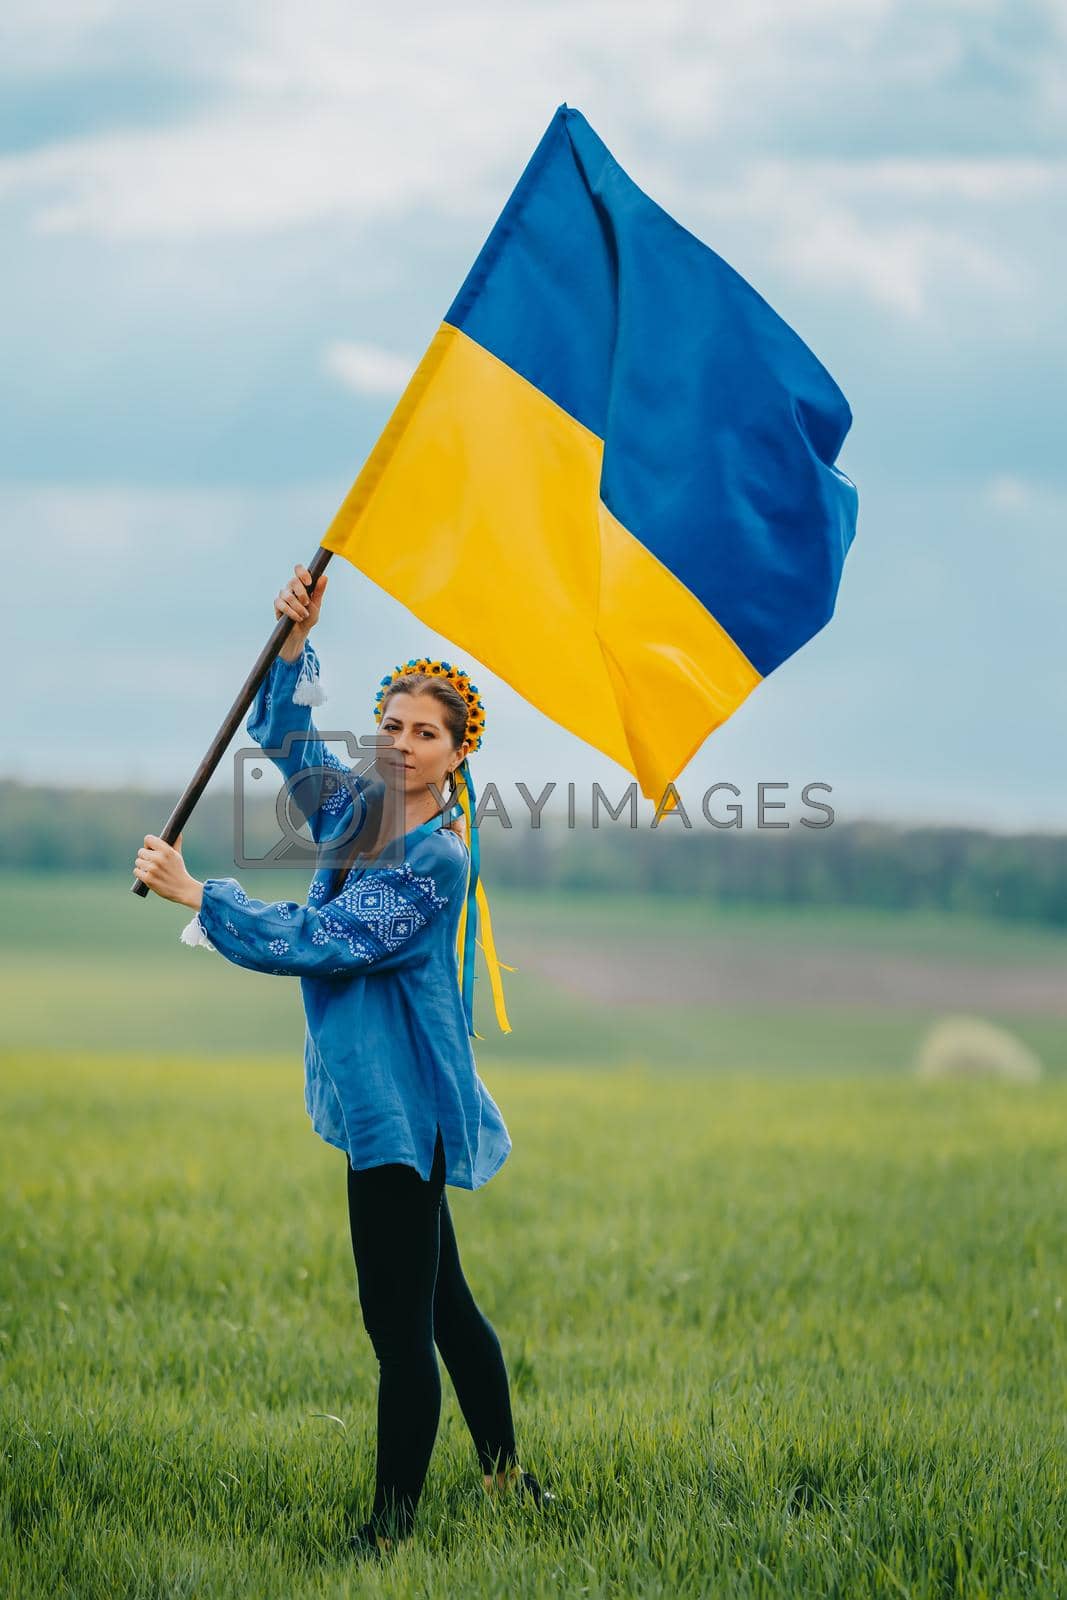 Royalty free image of Beautiful ukrainian woman with national flag on green field background. Young lady in blue embroidery vyshyvanka. Ukraine, independence, freedom, patriot symbol, victory in war. by kristina_kokhanova